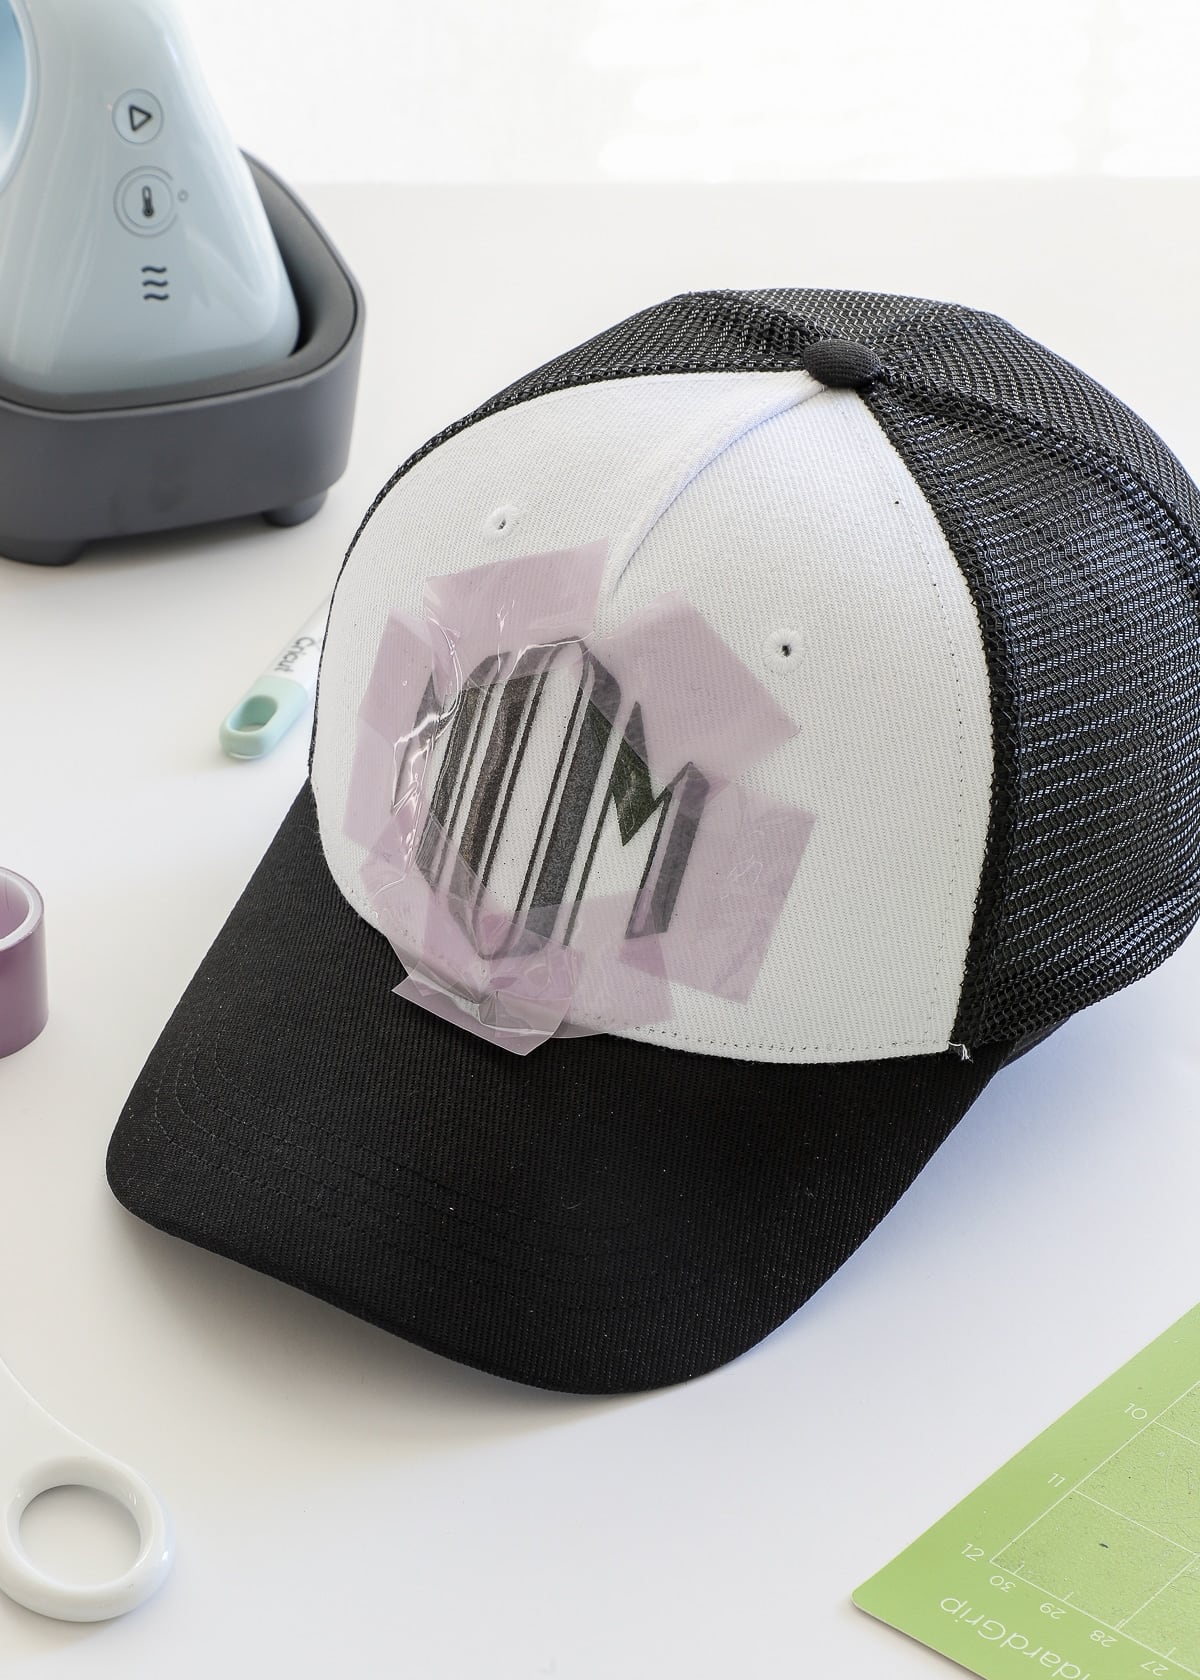 Creating an All-Over Hat Design with Cricut Hat Press - The Homes I Have  Made